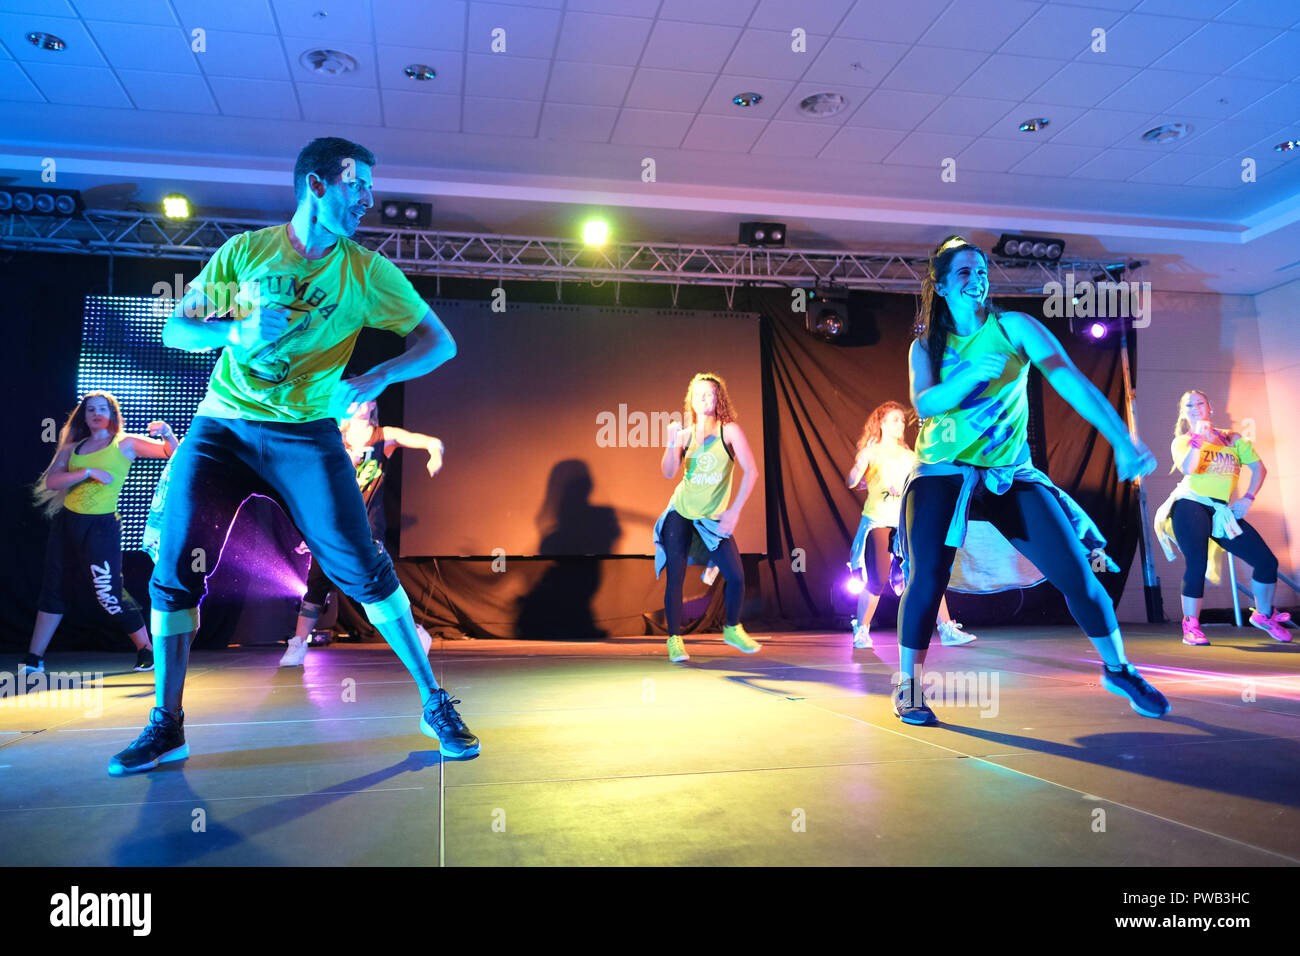 Instructors dancing energetically on stage during a Zumba class Stock Photo